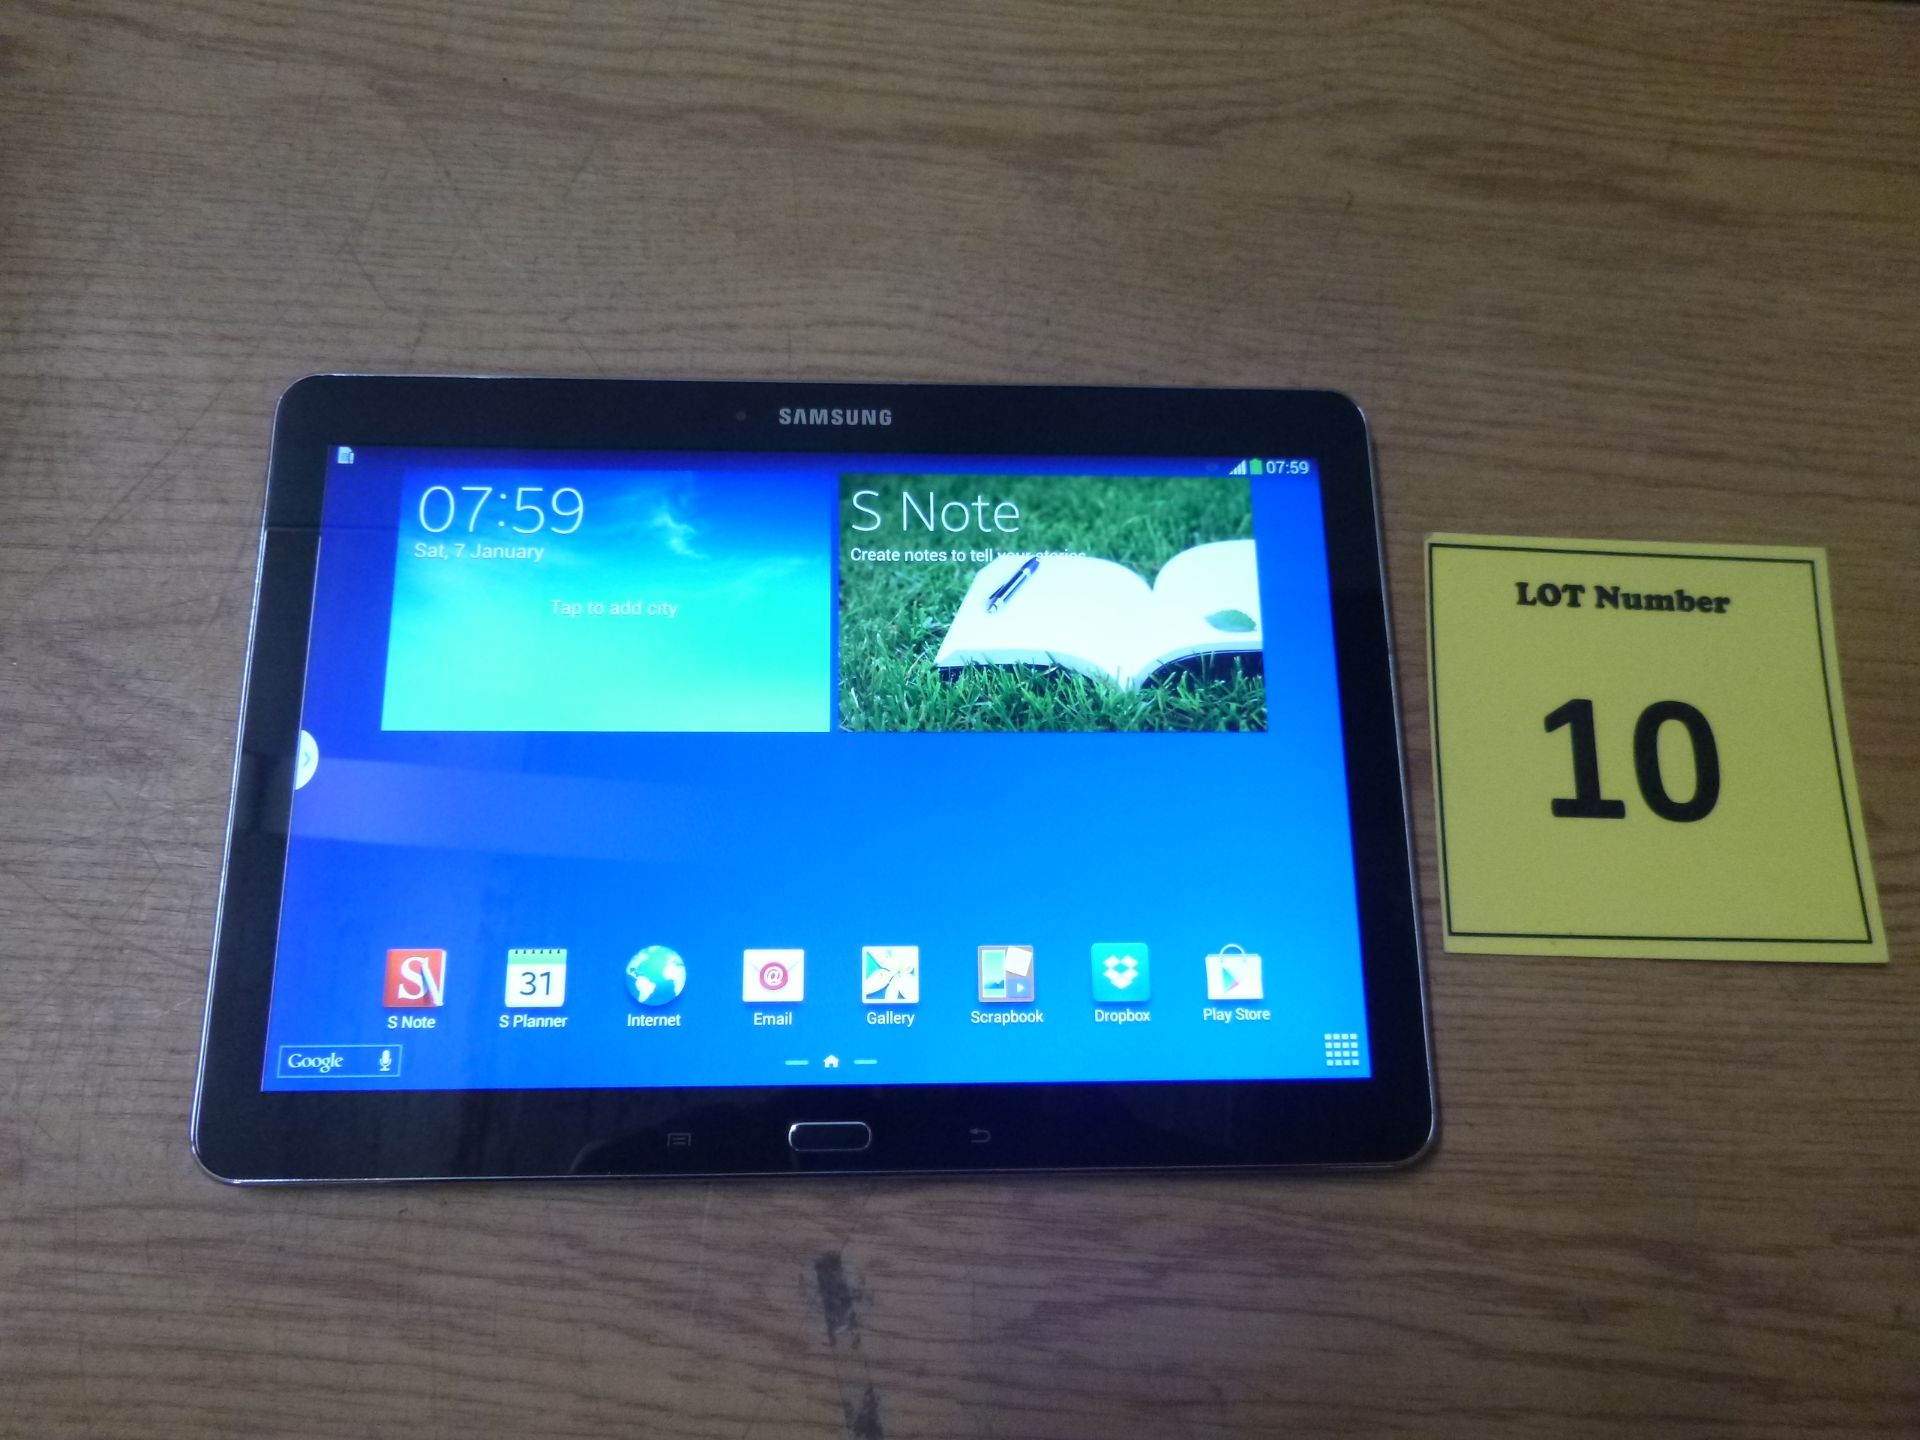 SAMSUNG GALAXY NOTE 10.1" TABLET . 16GB MODEL SM-P605. BLACK. WITH STYLUS